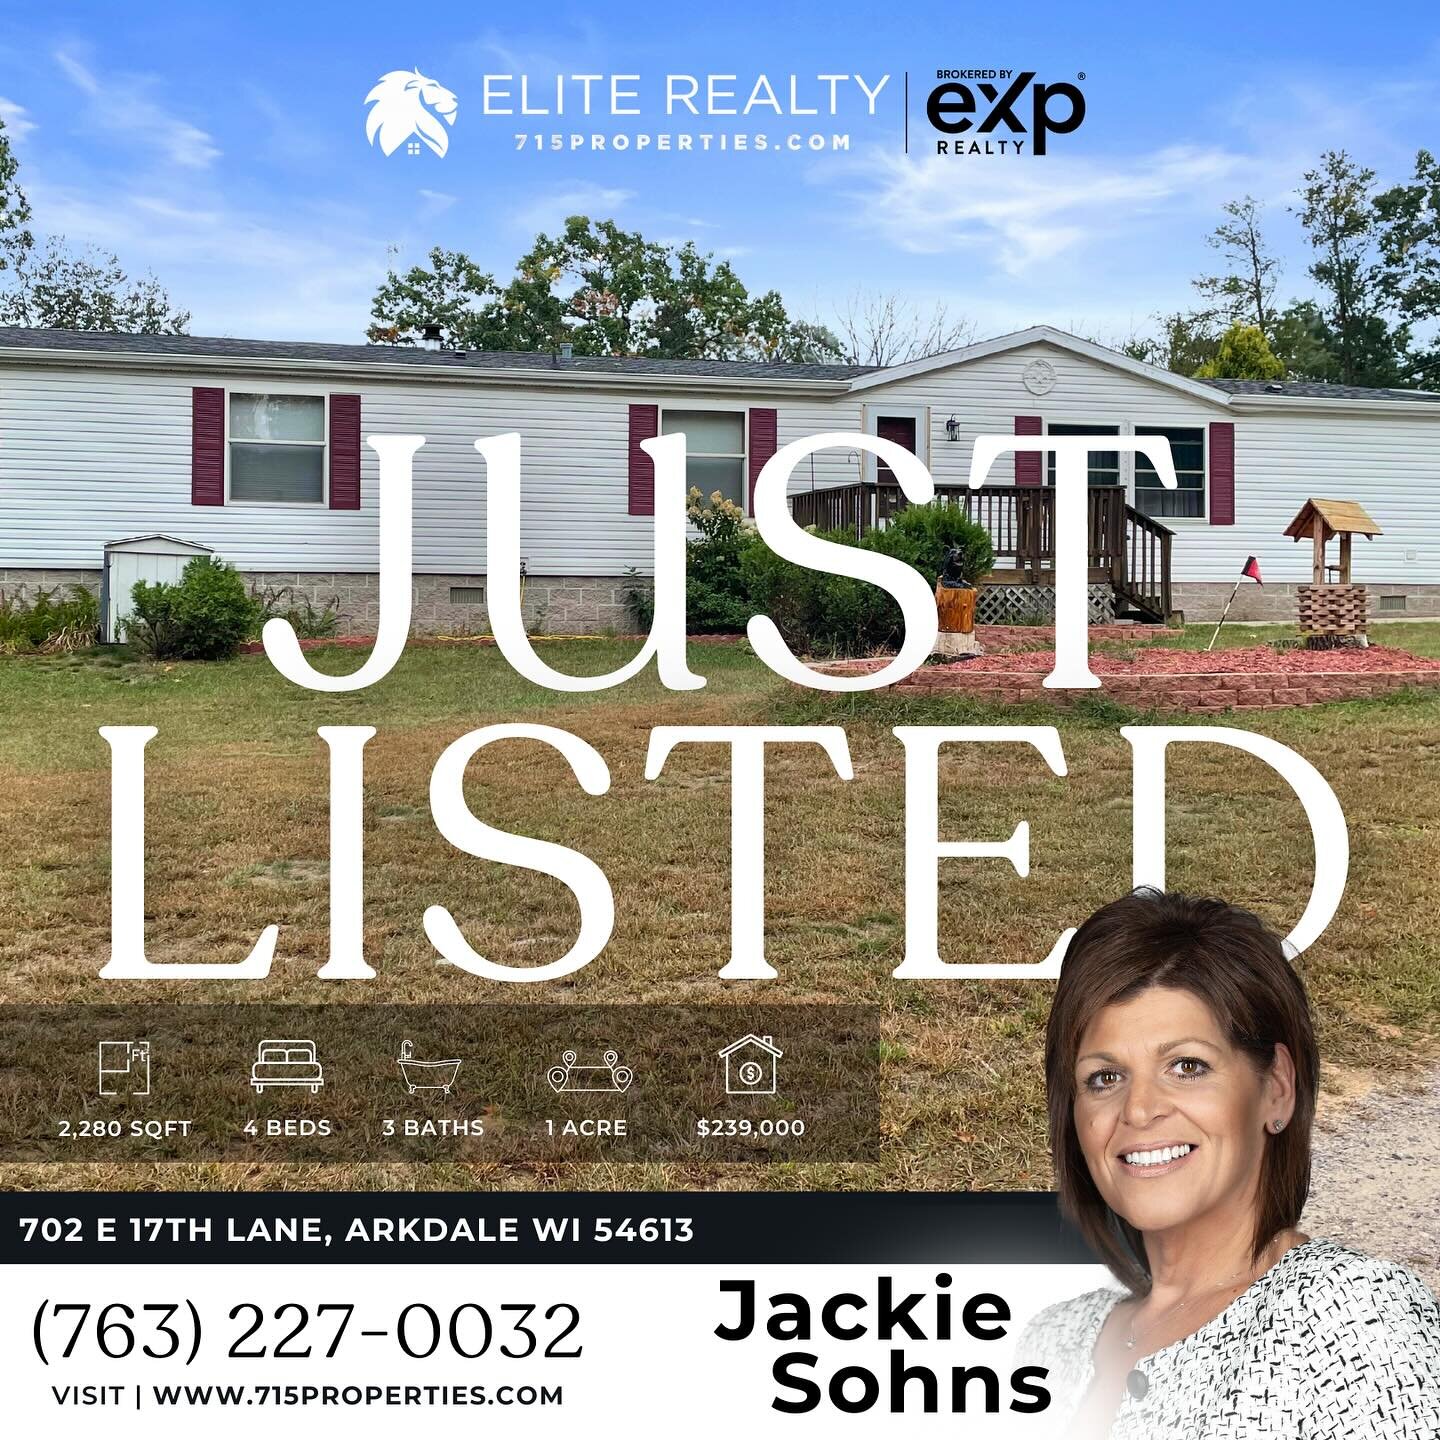 ✨Just Listed ✨Charming 4 bedroom, 3 full bathroom home situated on a spacious 1-acre lot, offering the perfect blend of comfort and space📍702 E 17th Lane, Arkdale | $239,000 | 🛏️ 4 | 🛁 3 | 🏞️ 1.00 acre - Contact Jackie Sohns- at (763) 227-0032 fo